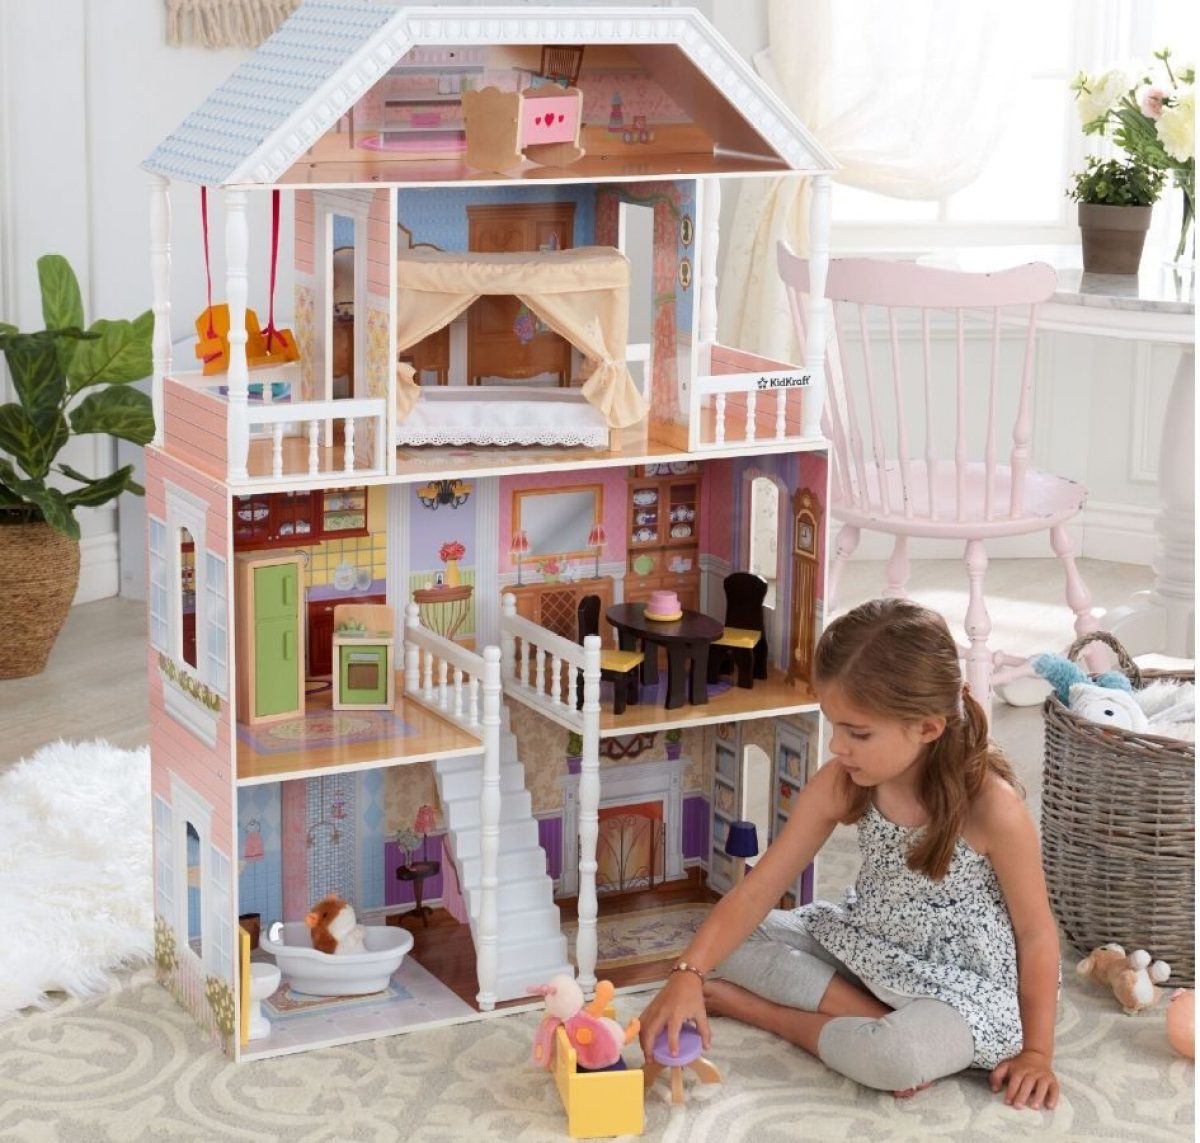 Kidkraft Savannah Dollhouse Just 79 99 Shipped On Walmart Com Regularly 149 - roblox action collection queen of the treelands figure pack includes exclusive virtual item walmart com walmart com